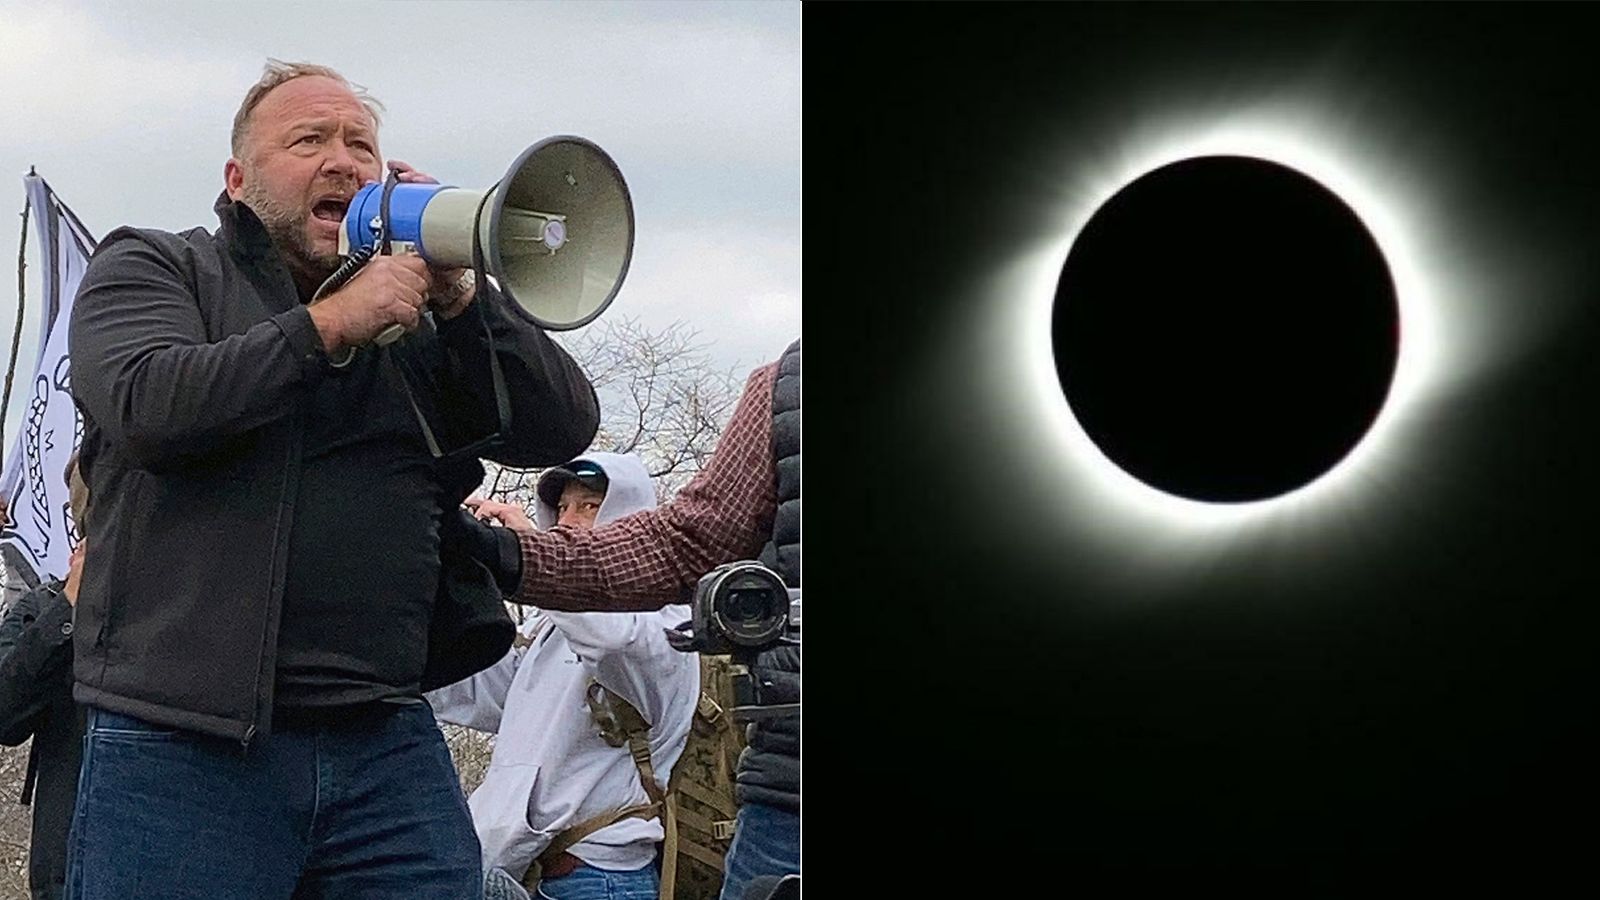 Armaggedon in Illinois, 'nefarious' scientists, warning signs from God: Marjorie Taylor Greene, Alex Jones and influencers peddle conspiracy theories about solar eclipse